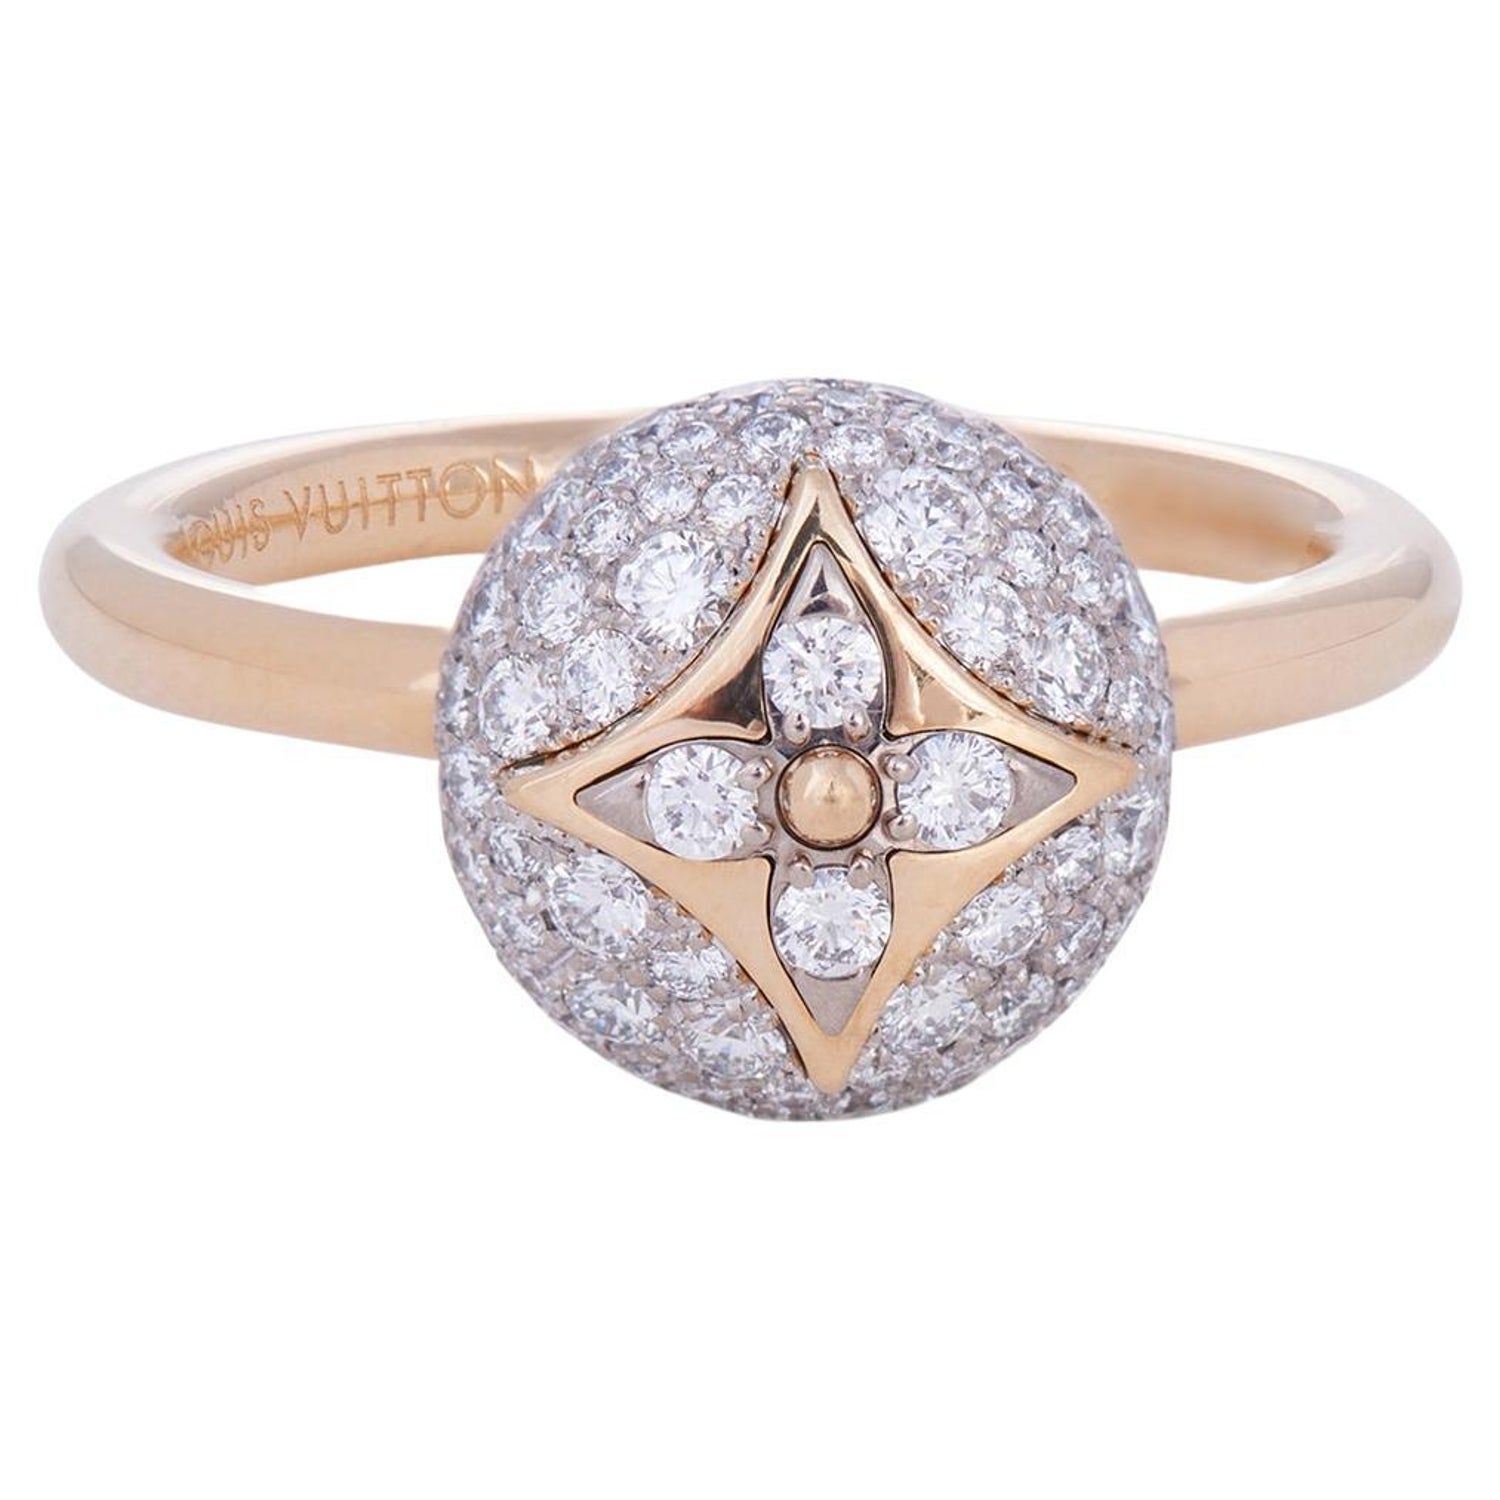 Louis Vuitton - Colour Blossom Mini Star Ring Yellow Gold Onyx and Diamond - Gold - Unisex - Size: 47 - Luxury